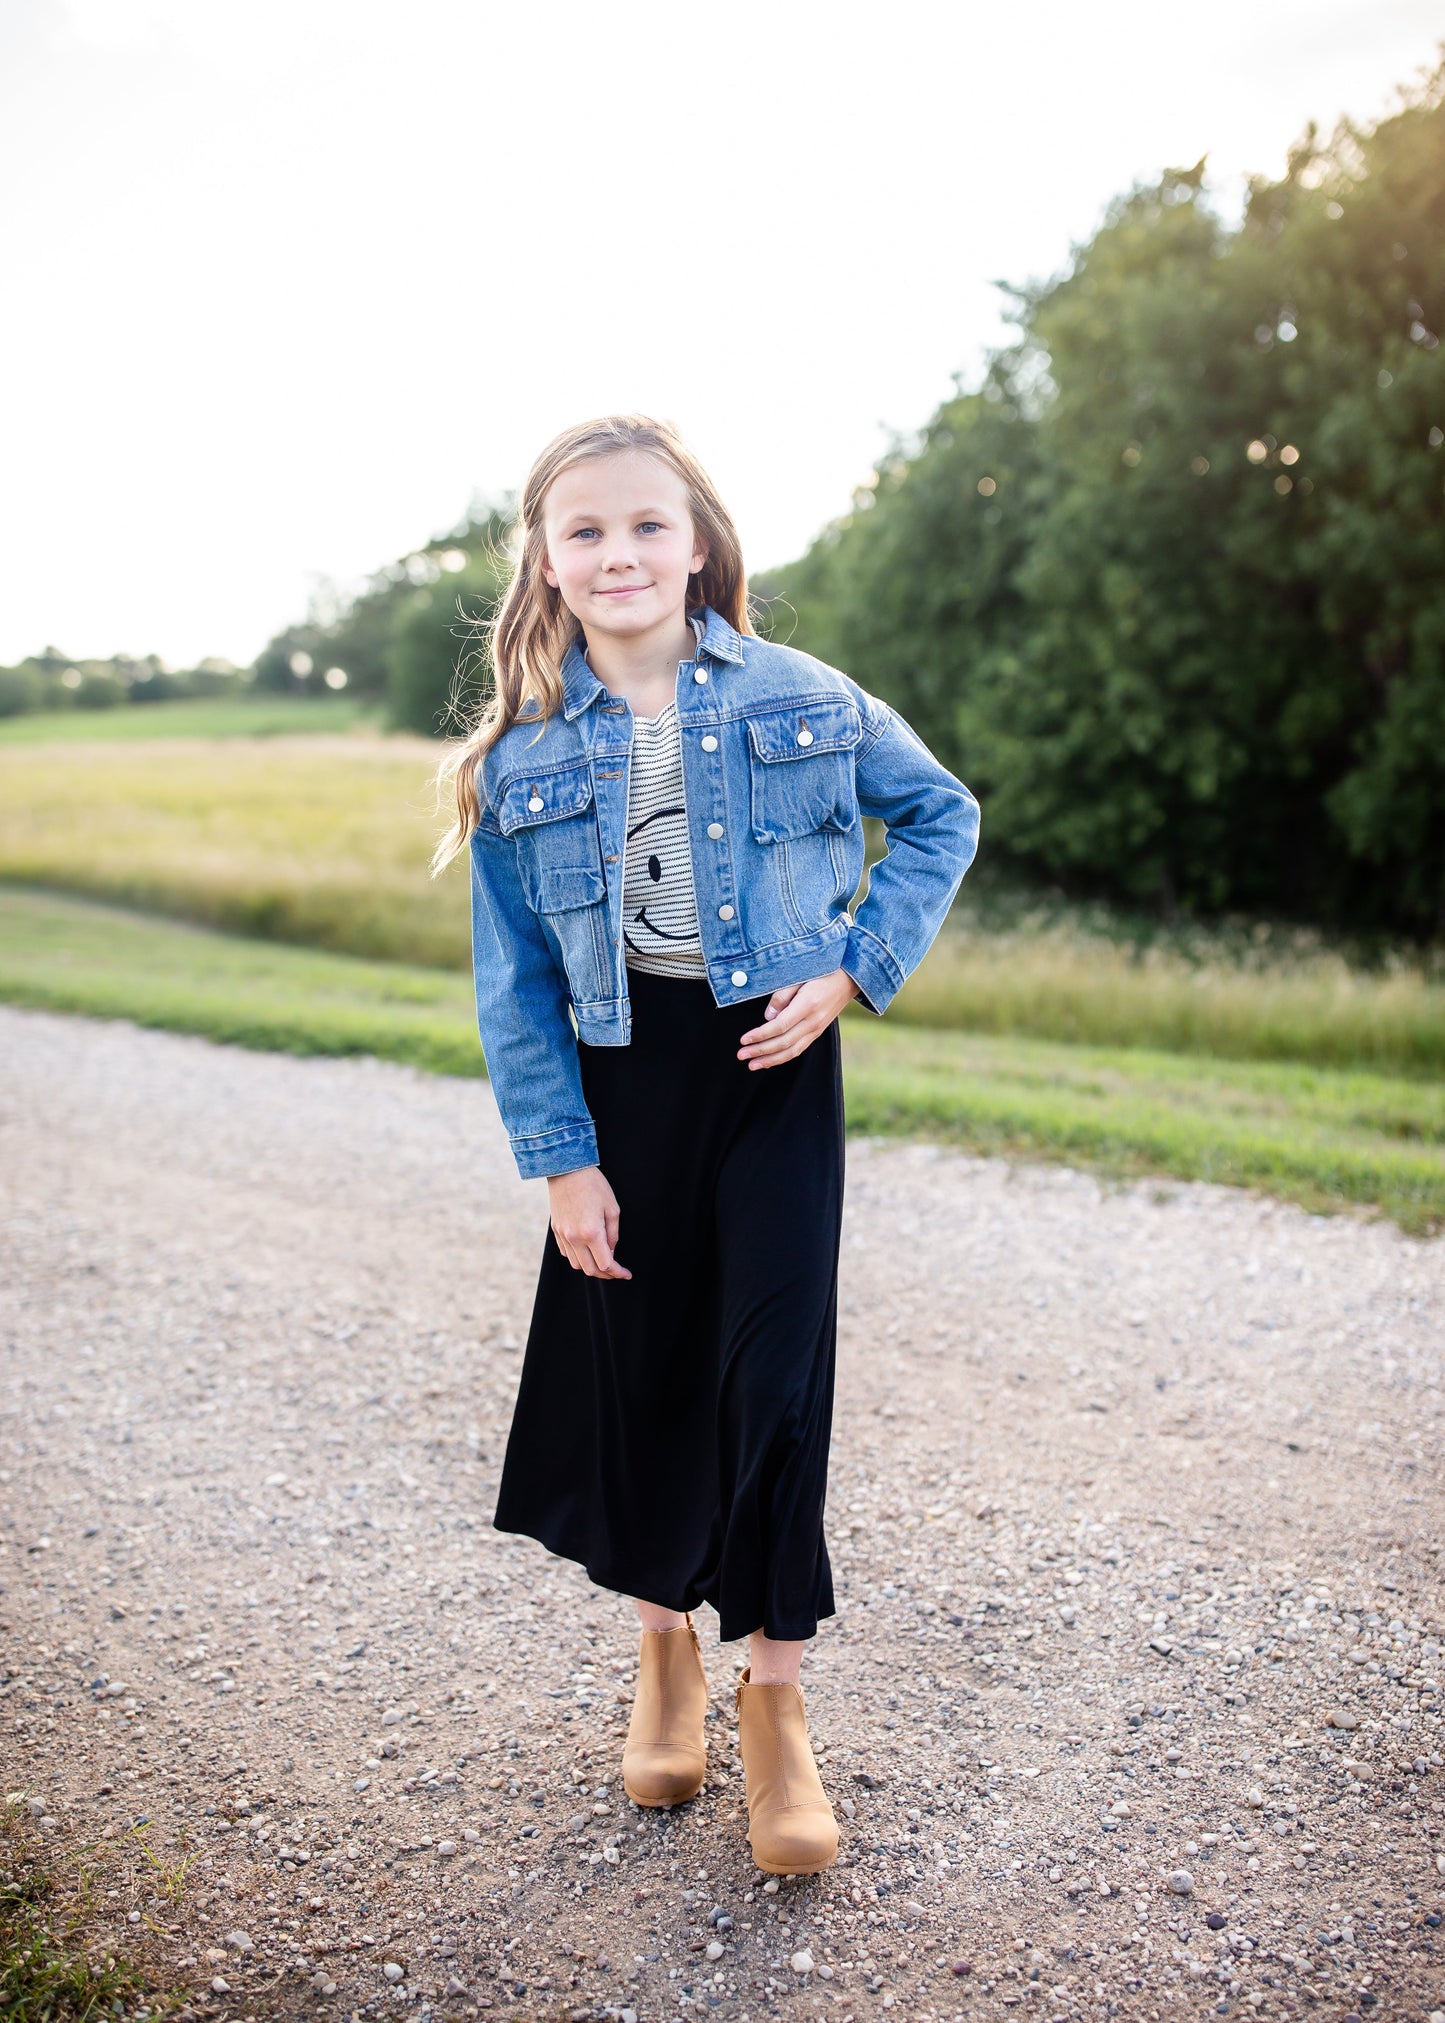 The Girls Clarissa Maxi Skirt is an Inherit Design with a stretch waist for comfortable movement all day long! This skirt is easy to throw on and go as it is super stretchy and made of quality fabric! She's going to love that she can still do all the things while wearing this skirt!